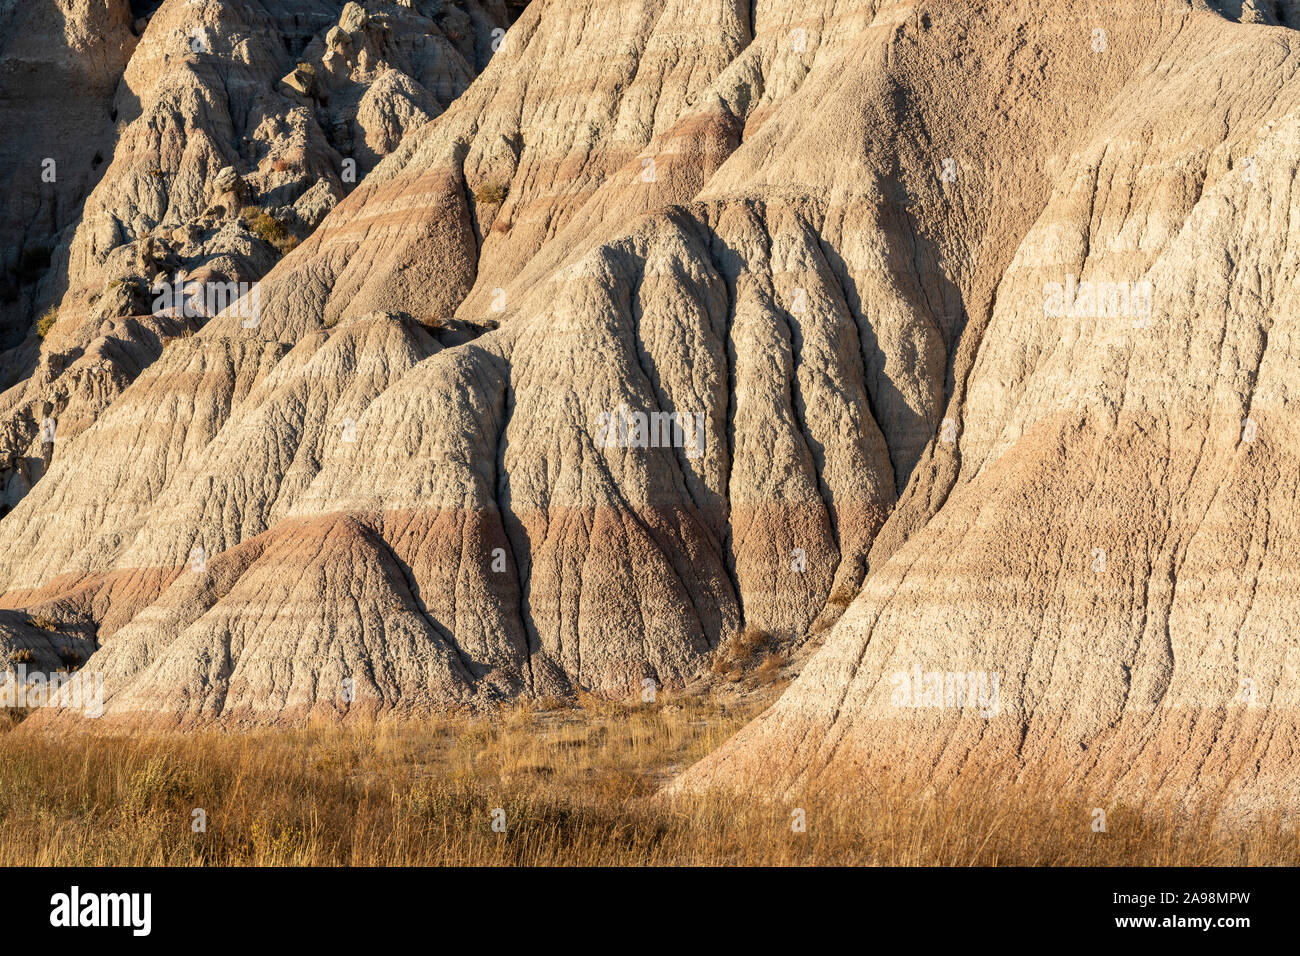 Eroded buttes, Badlands National Park, South Dakota, USA, by Dominique Braud/Dembinsky Photo Assoc Stock Photo